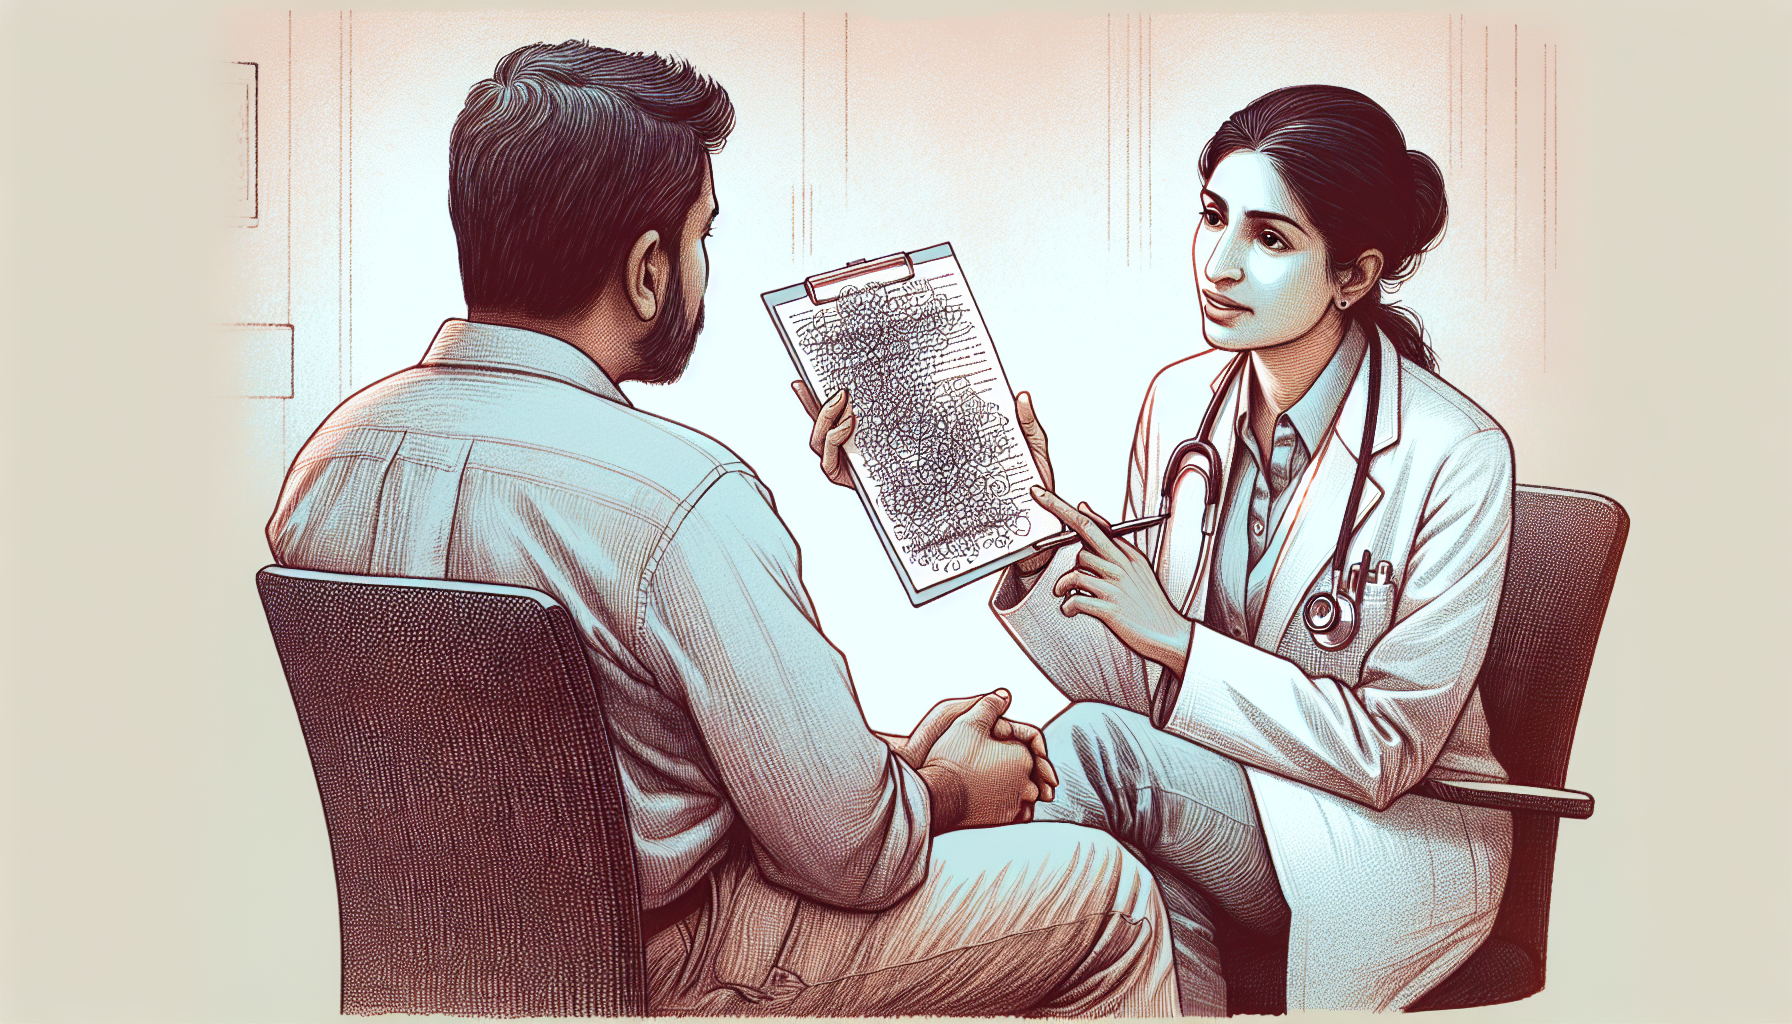 Doctor and patient discussing disability paperwork requirements